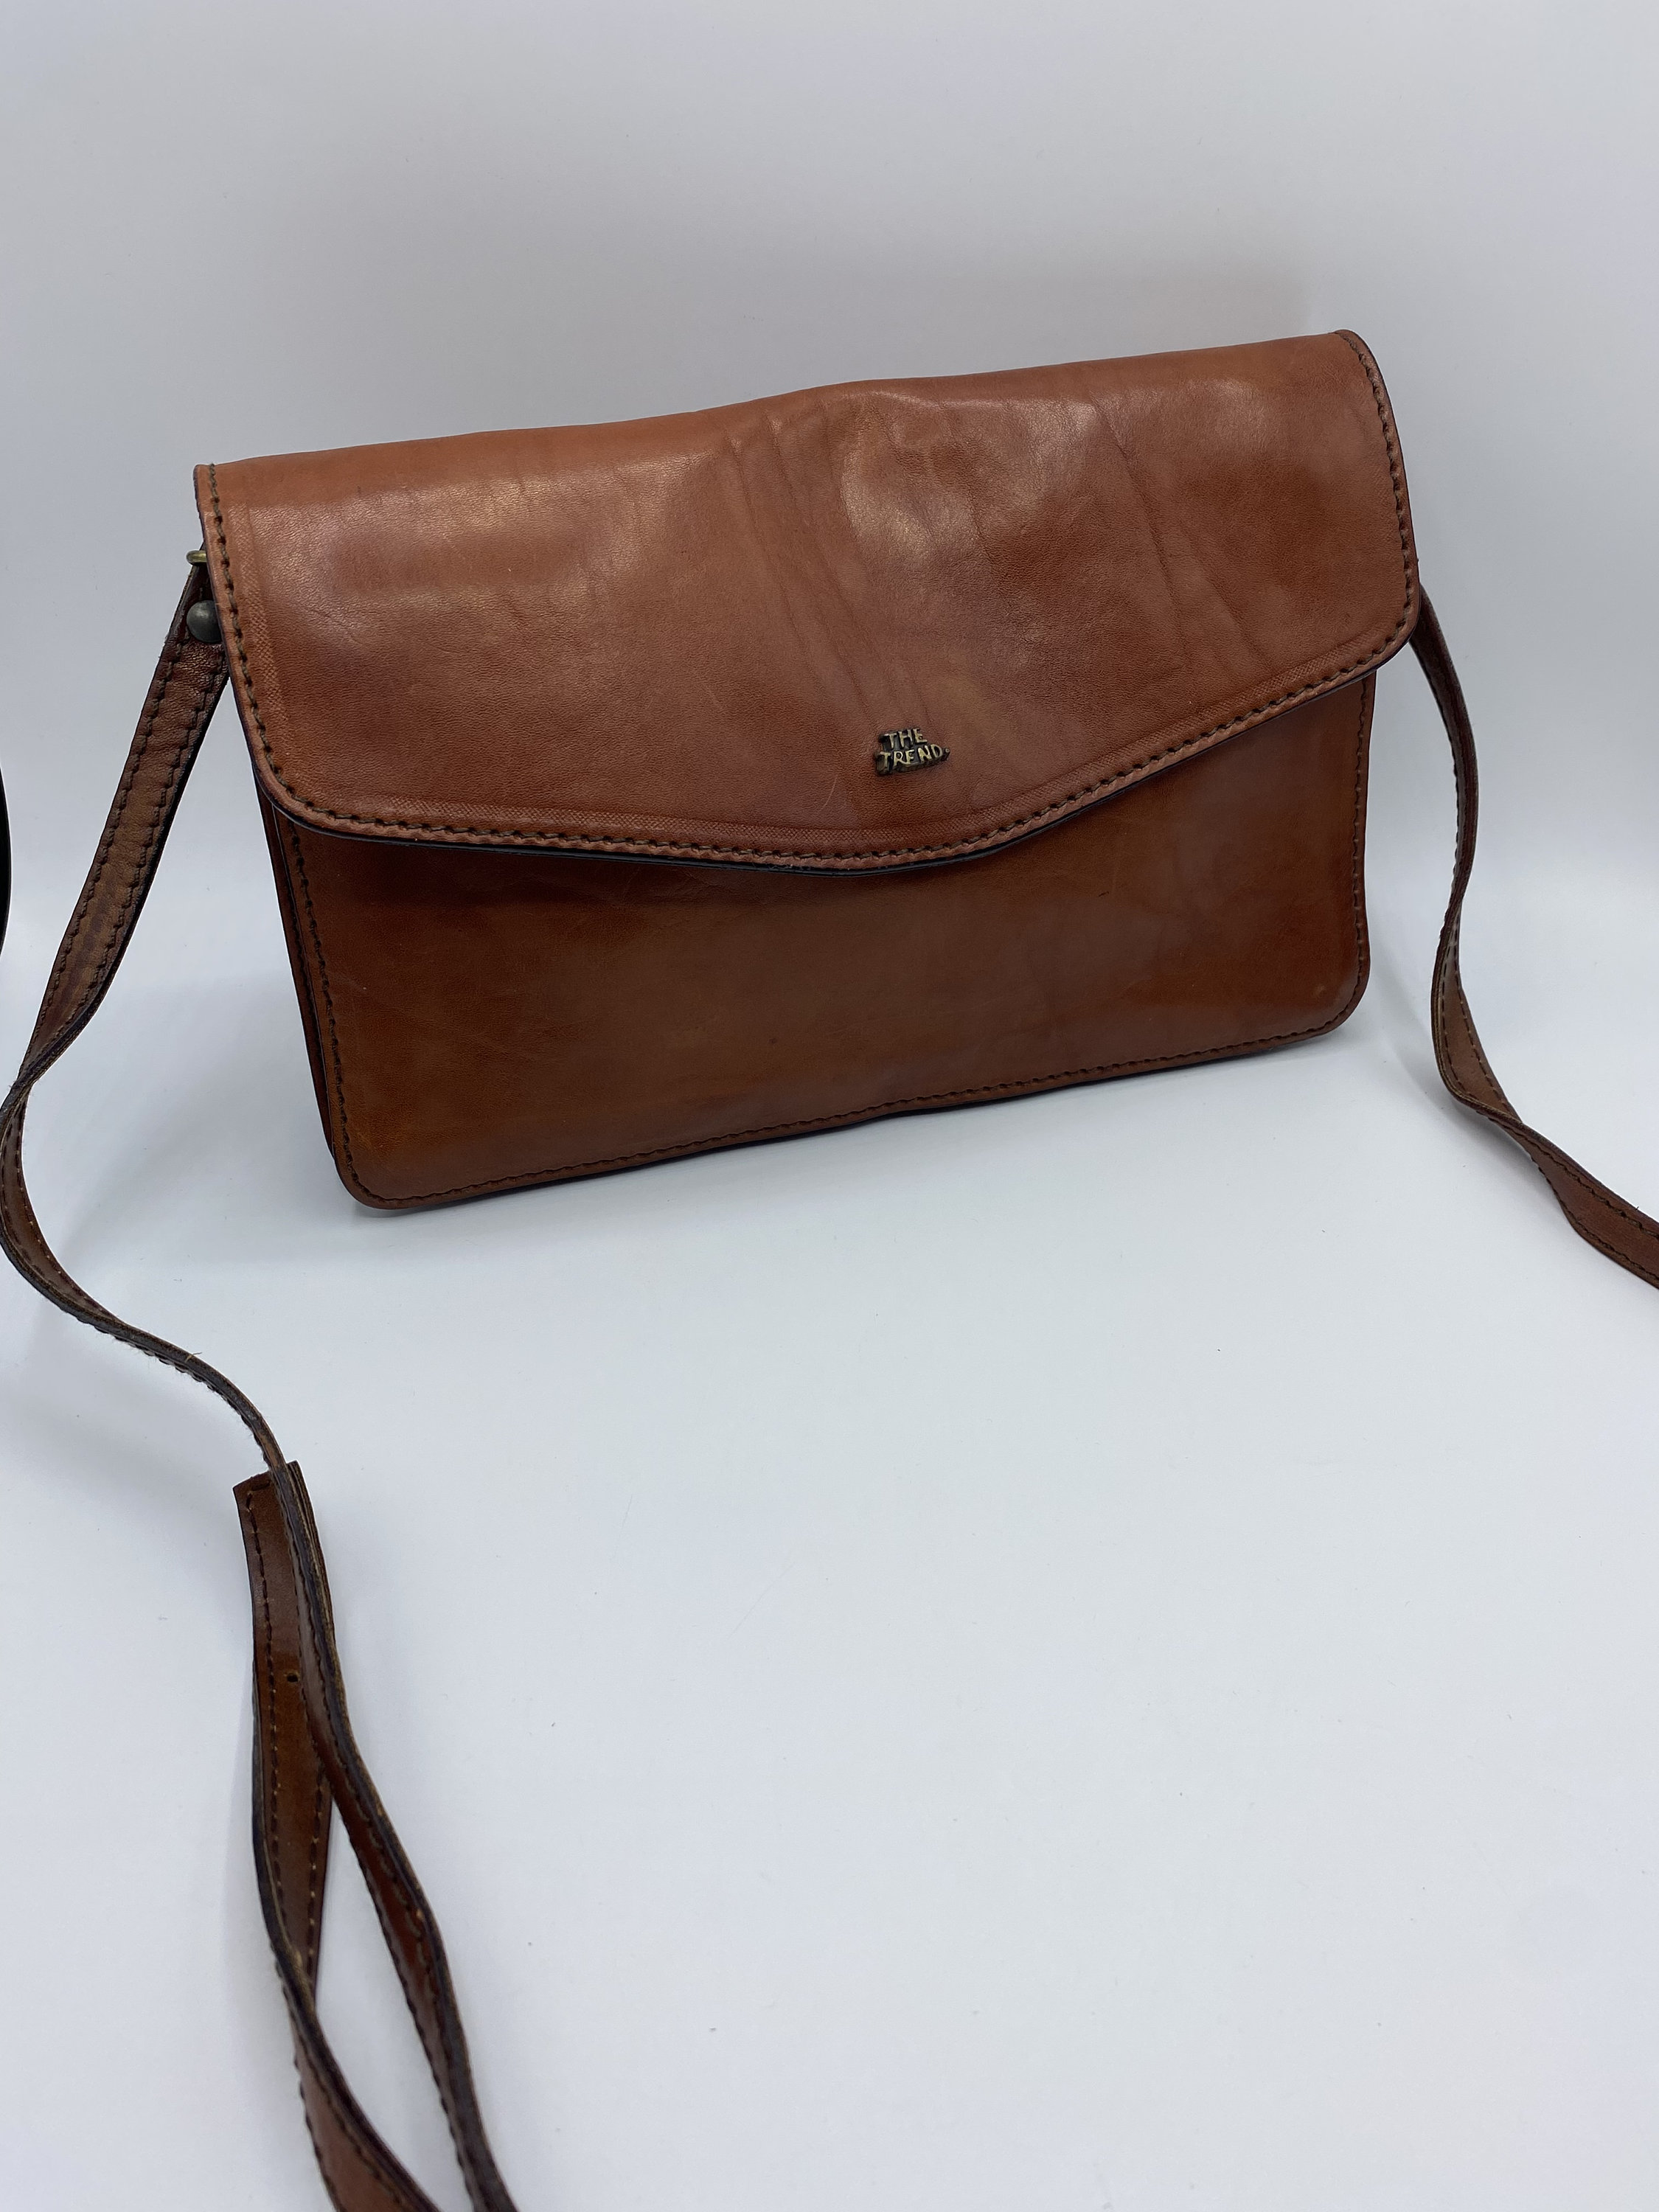 Alma Tonutti Stylish Ladies Leather Slouch Shoulder Bag Made in Italy Cross  Body Strap